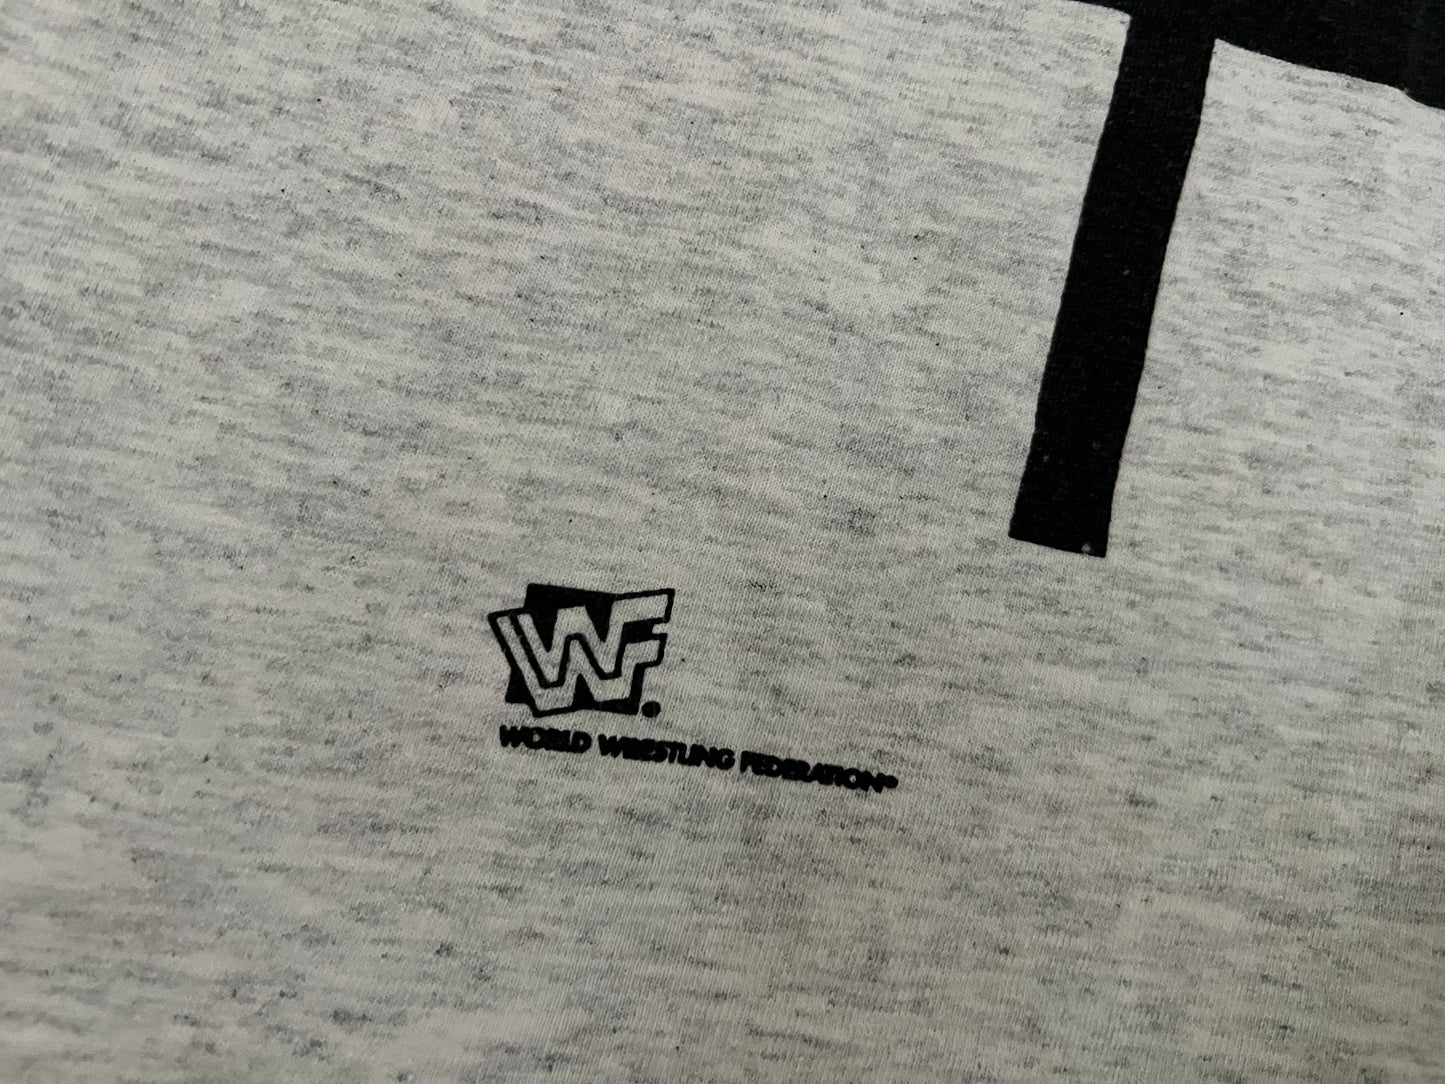 1995 WWF Logo “Officially XL Tee” shirt with big print and printed Airbrush logo on the back